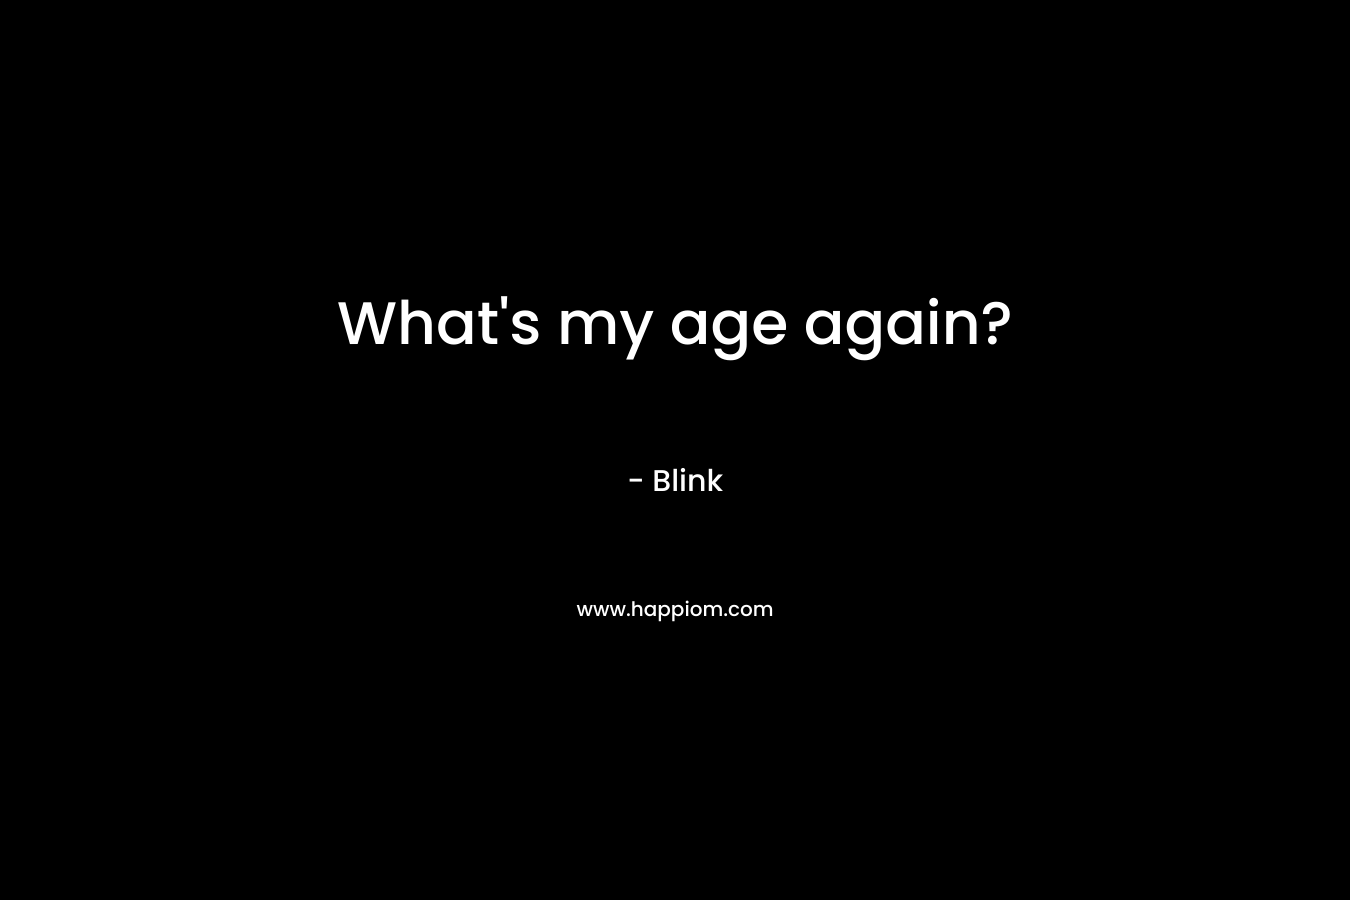 What's my age again?